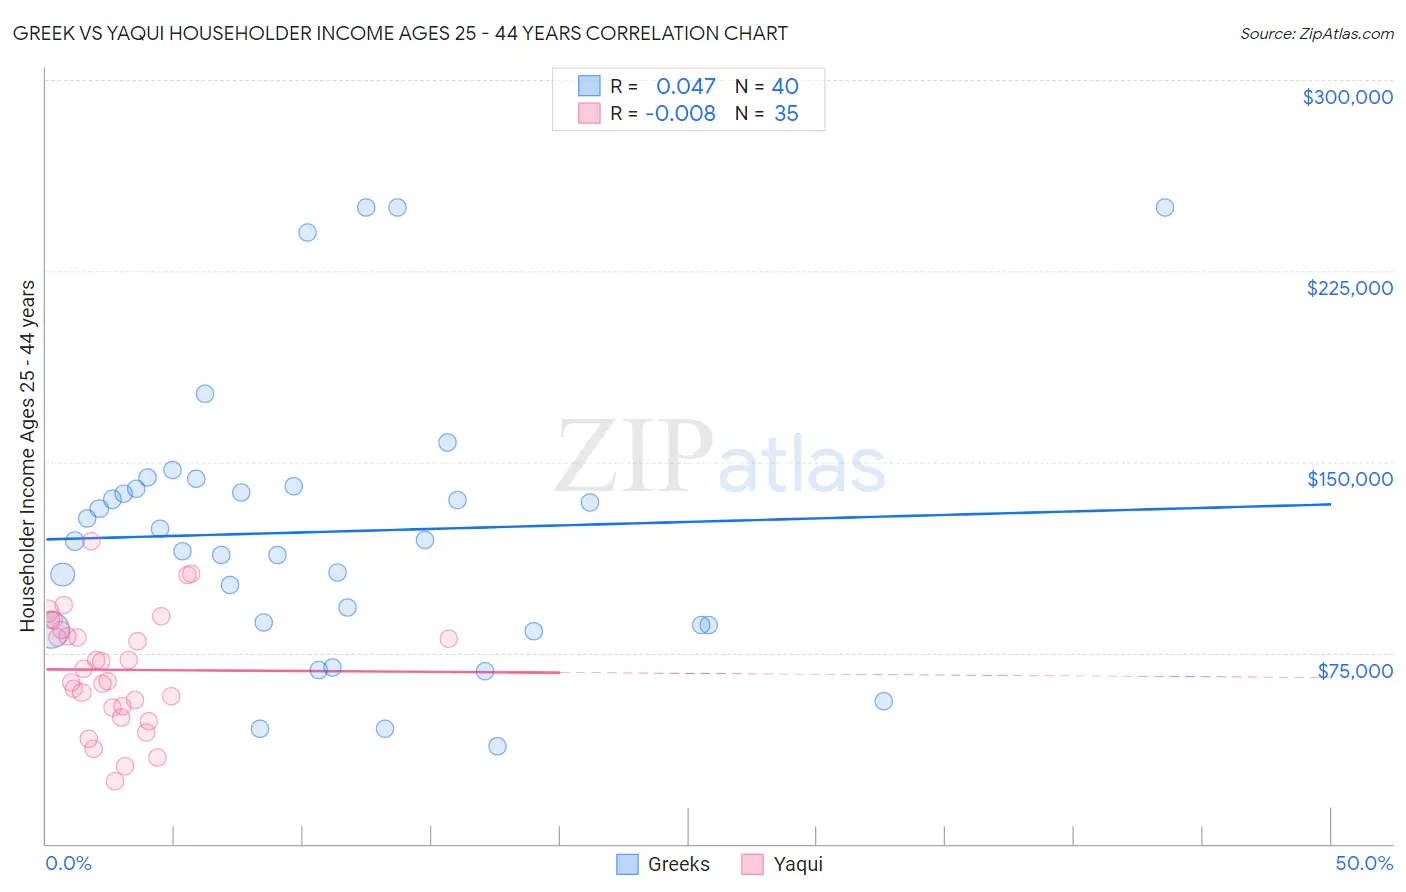 Greek vs Yaqui Householder Income Ages 25 - 44 years